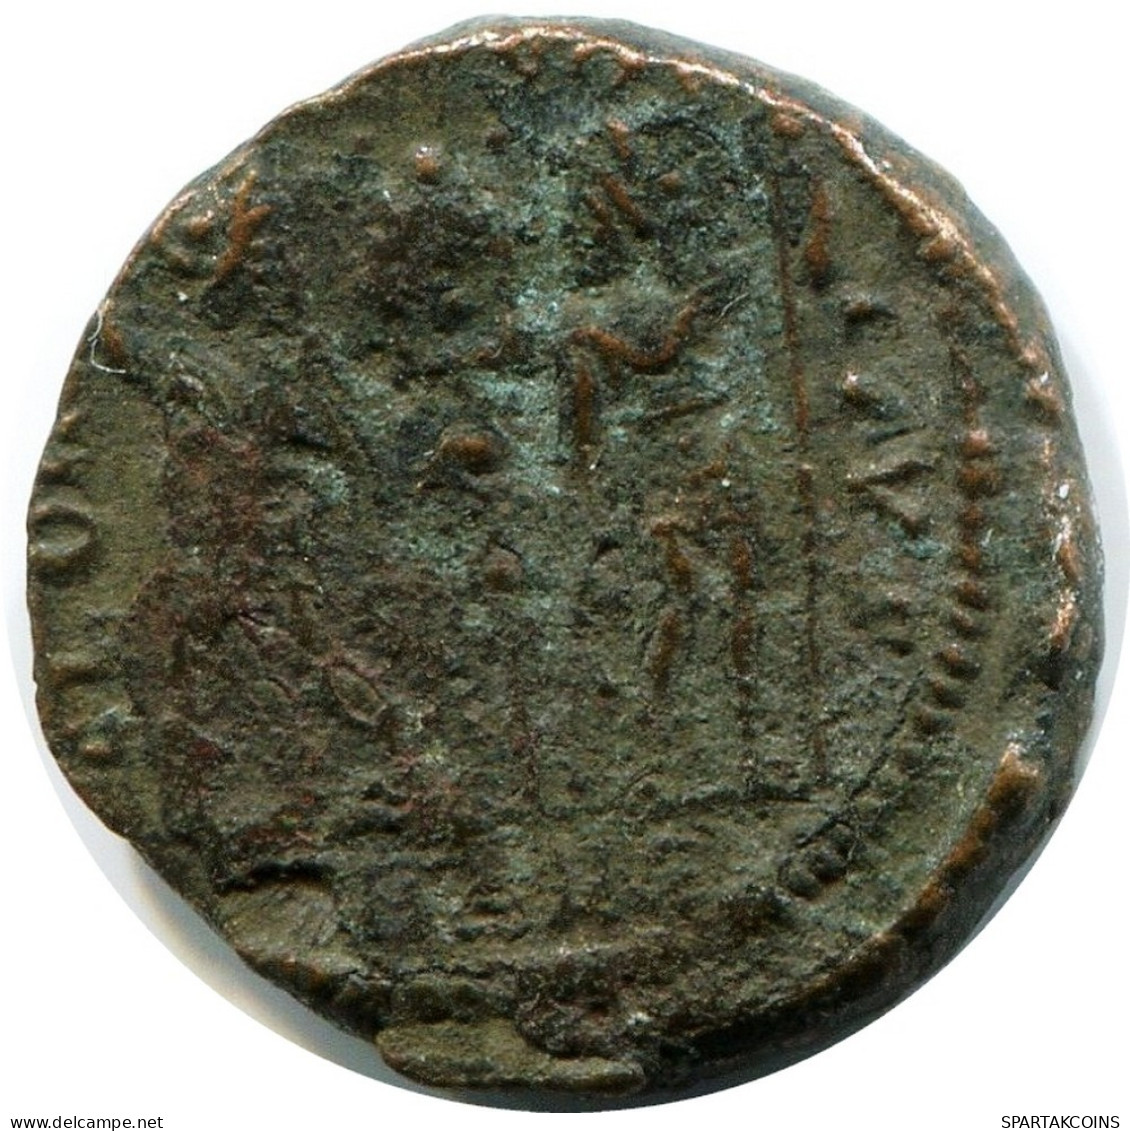 ROMAN Moneda MINTED IN ANTIOCH FOUND IN IHNASYAH HOARD EGYPT #ANC11278.14.E.A - The Christian Empire (307 AD Tot 363 AD)